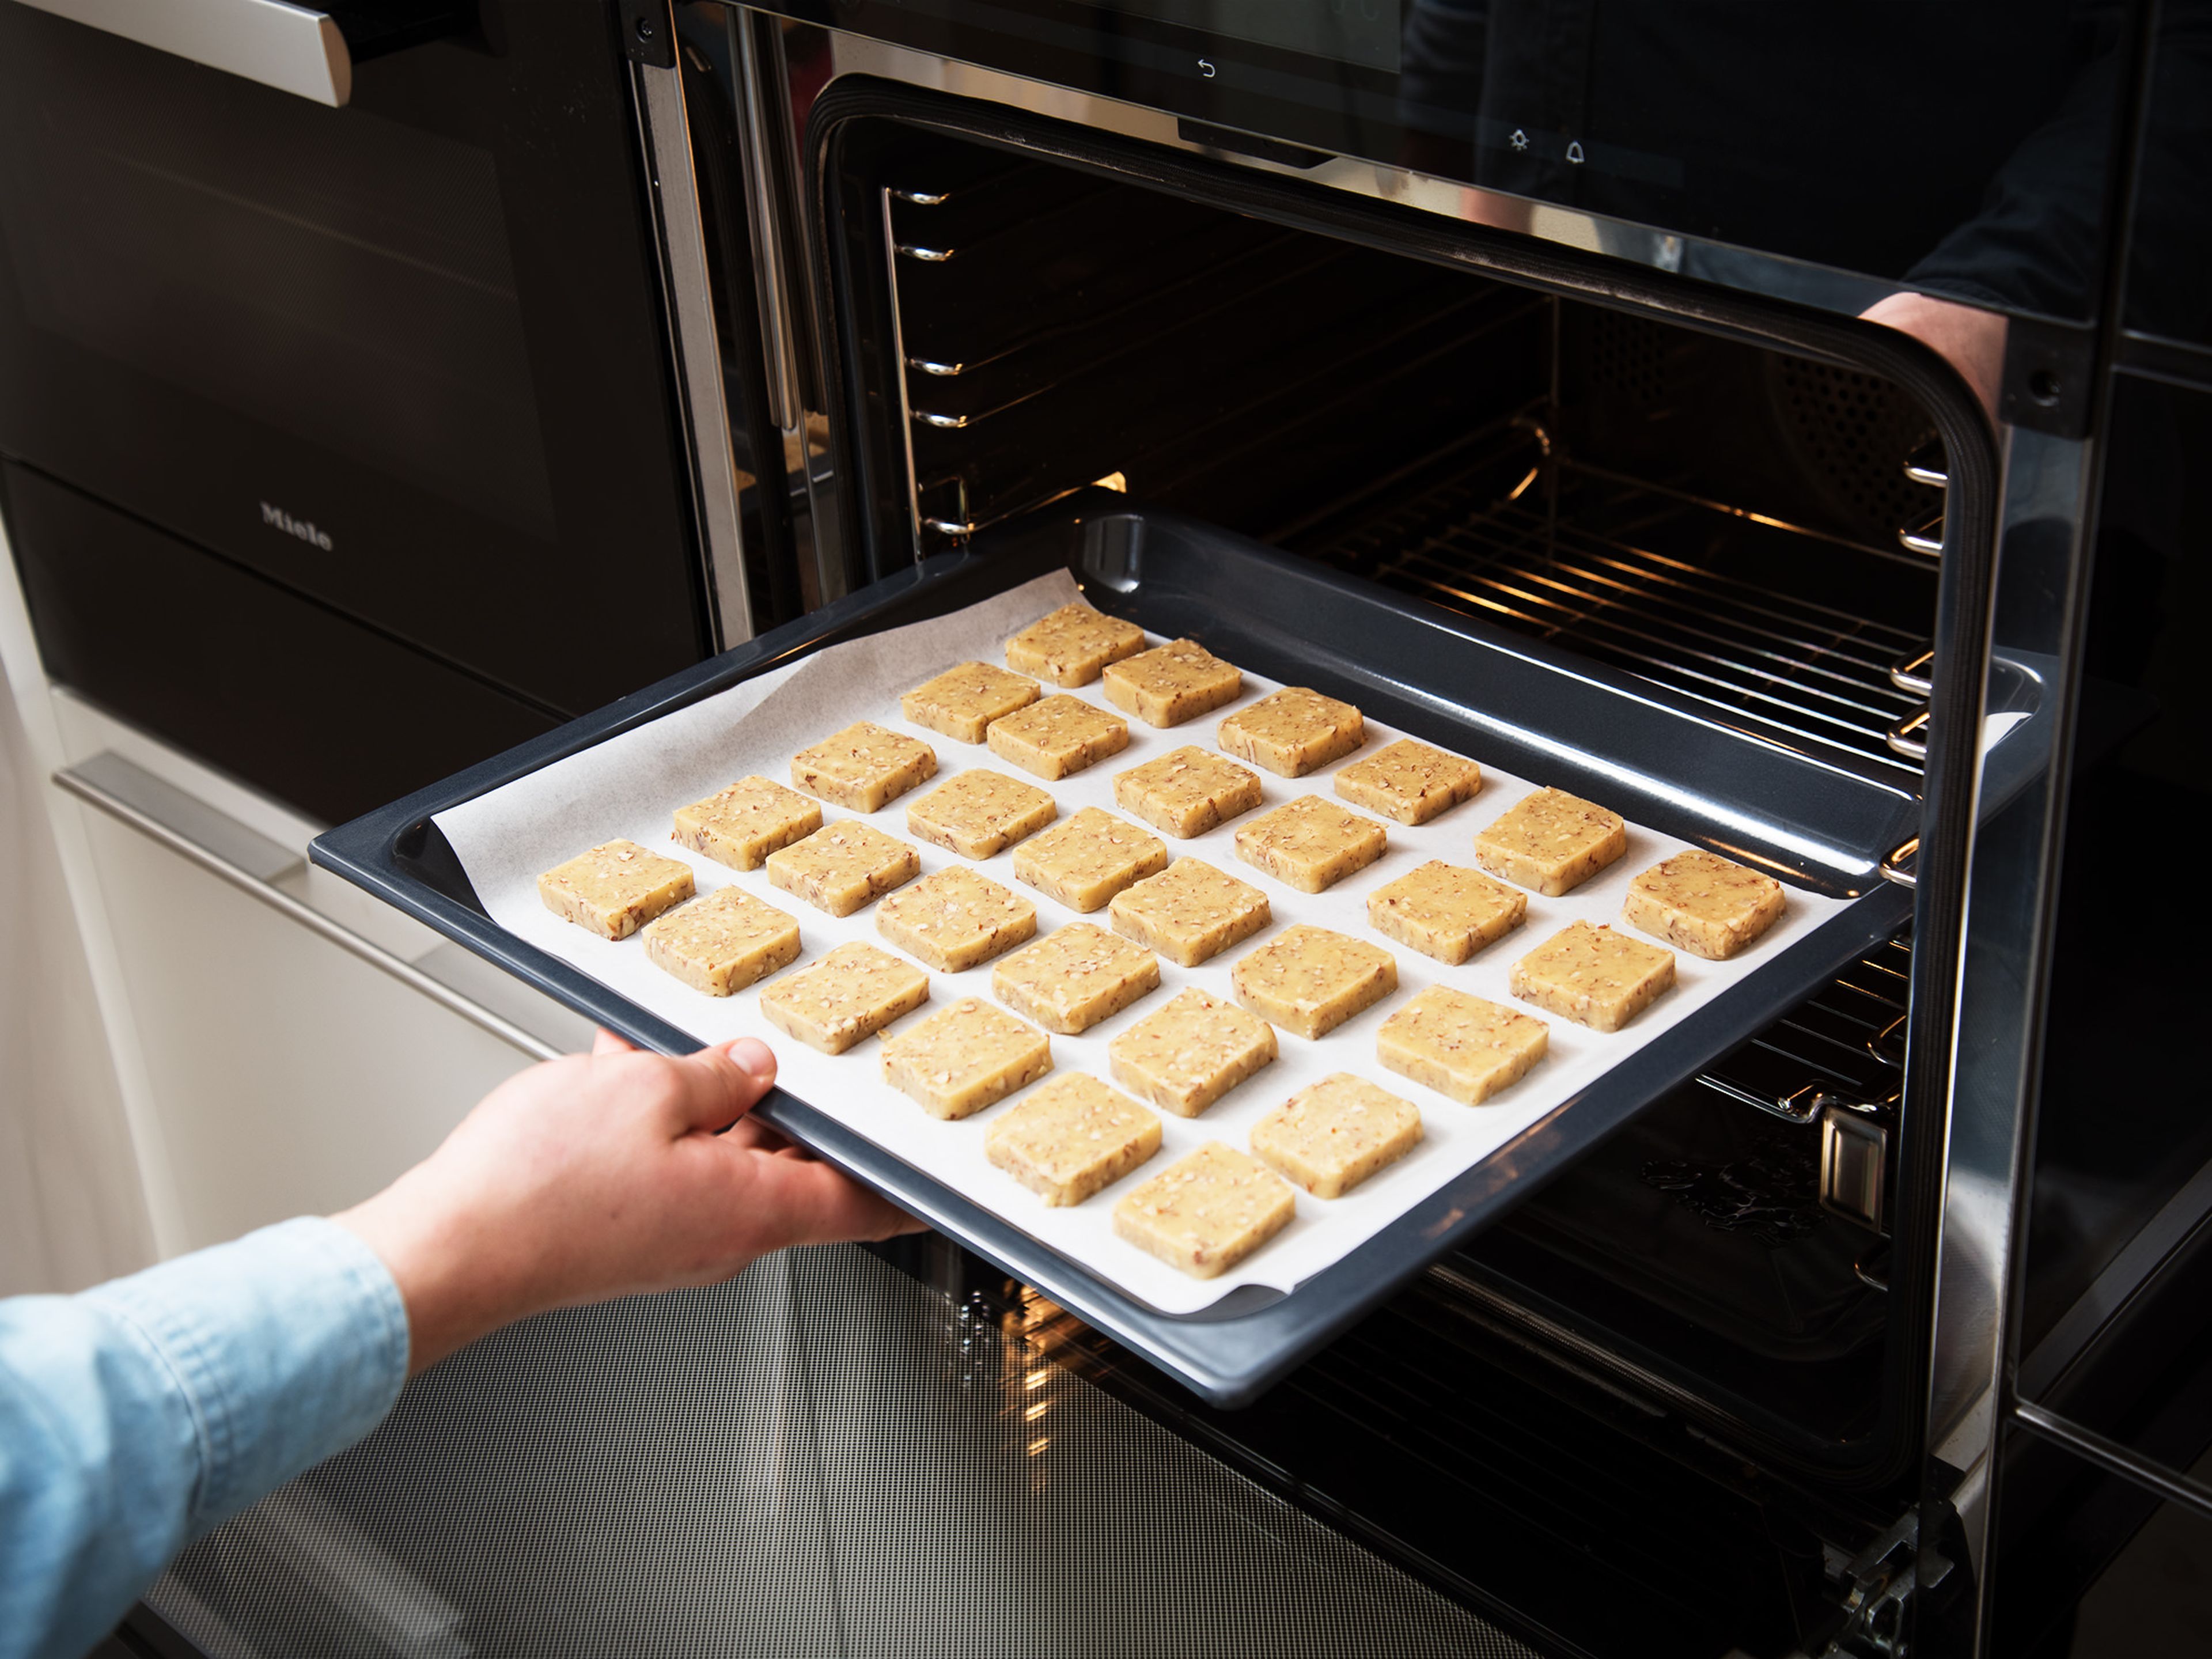 If the dough is too sticky to work with, freeze it briefly for approx. 6 – 8 min. Form a log and cut dough into desired shape, then place the shortbread on a lined baking tray. Bake at 160°C/325°F for approx. 12 min. Rotate the sheet and bake for another  10 – 13 min. Take the shortbread out, let cool, and enjoy!